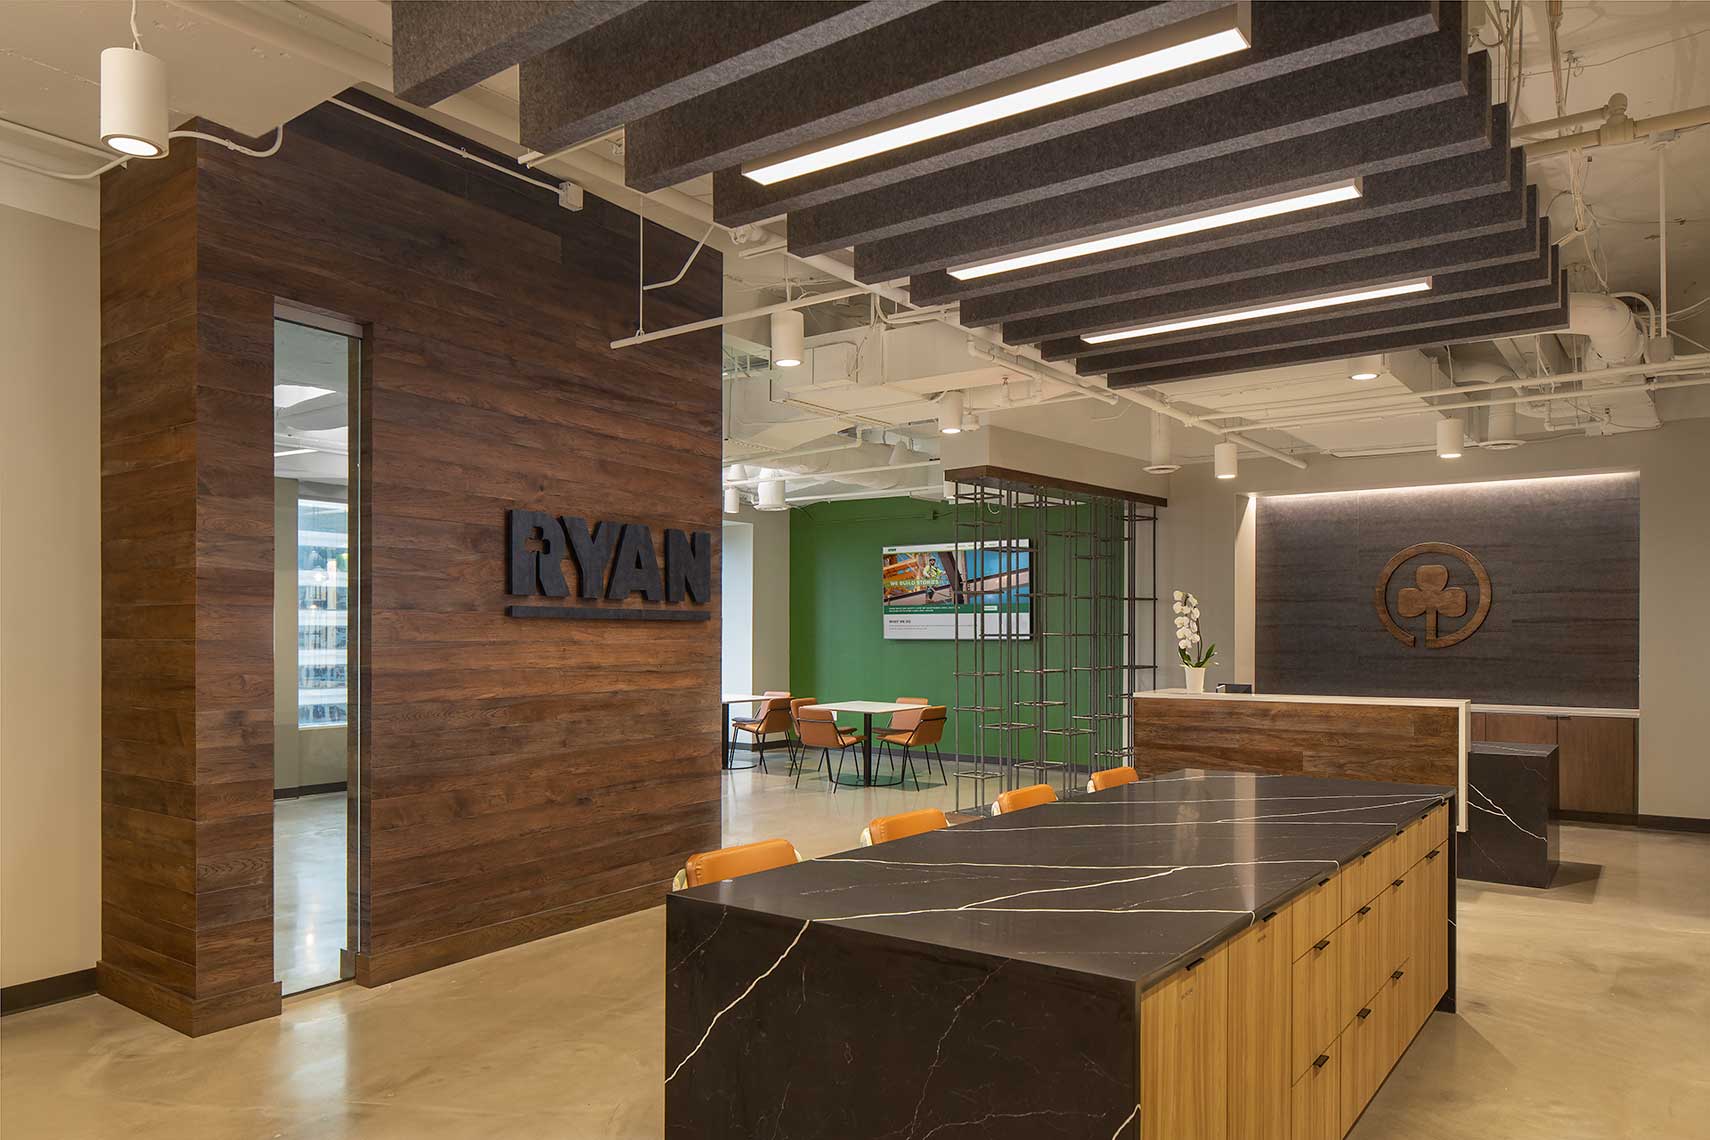 An image of the Ryan Companies' Atlanta offices reception area, with warm wood and bold graphics